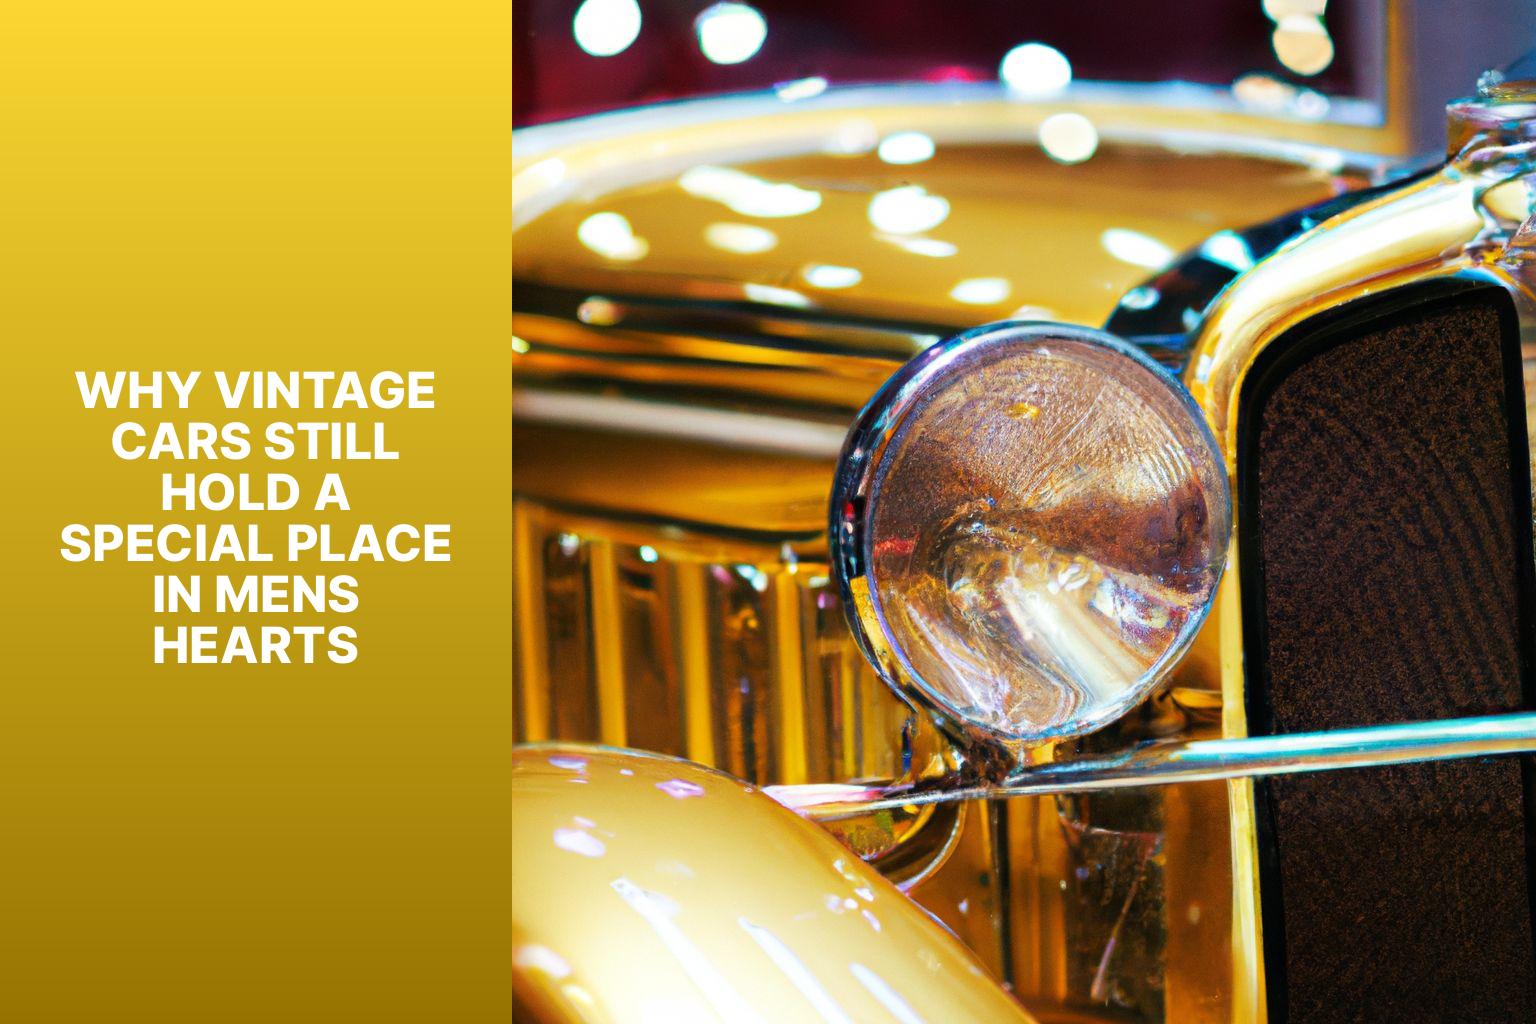 Why Vintage Cars Still Hold a Special Place in Men’s Hearts